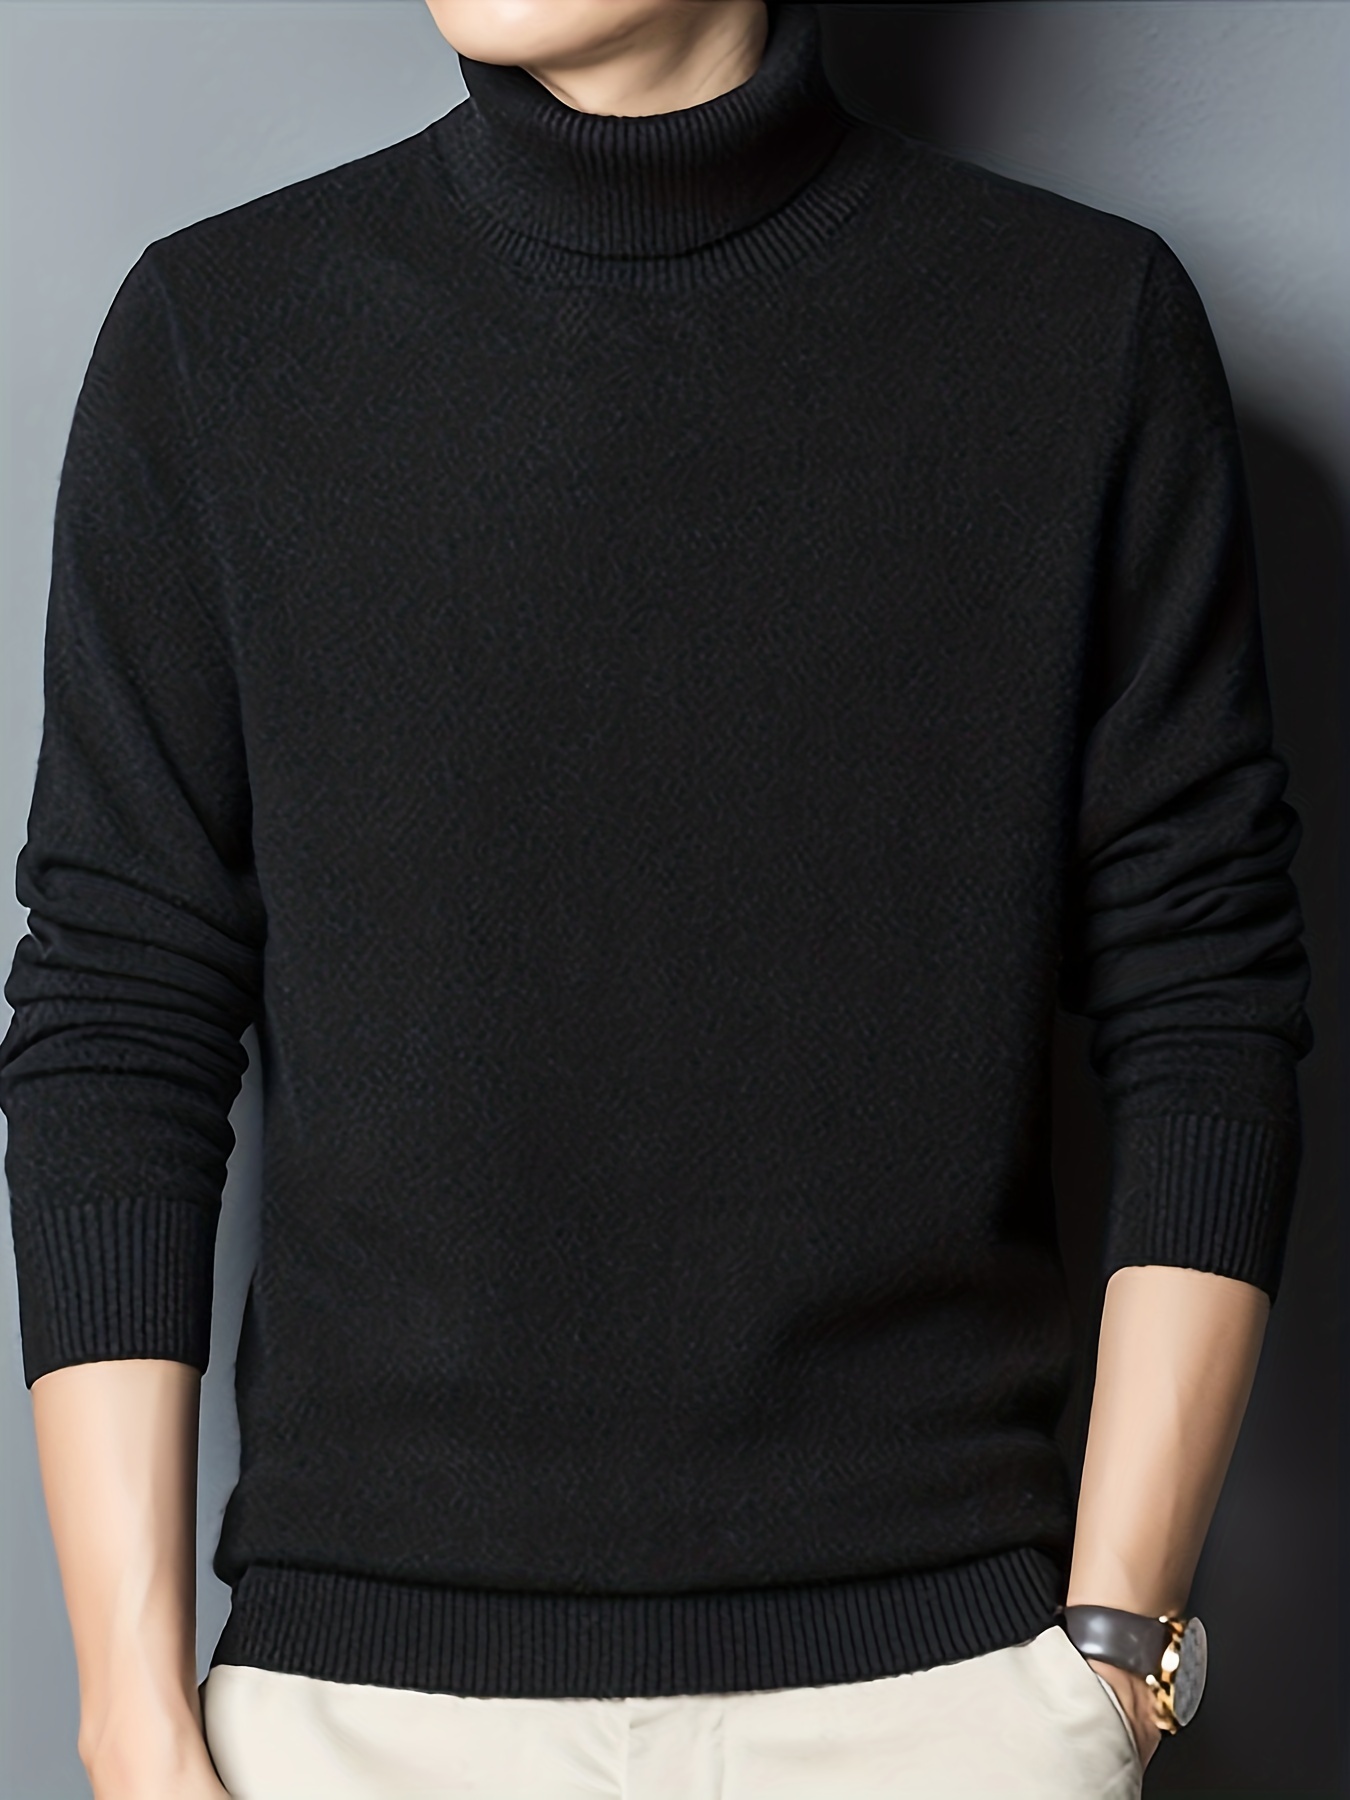 Men's Fashion Long Sleeve Solid Knitted Sweater, Men's Pullover For Autumn  Winter